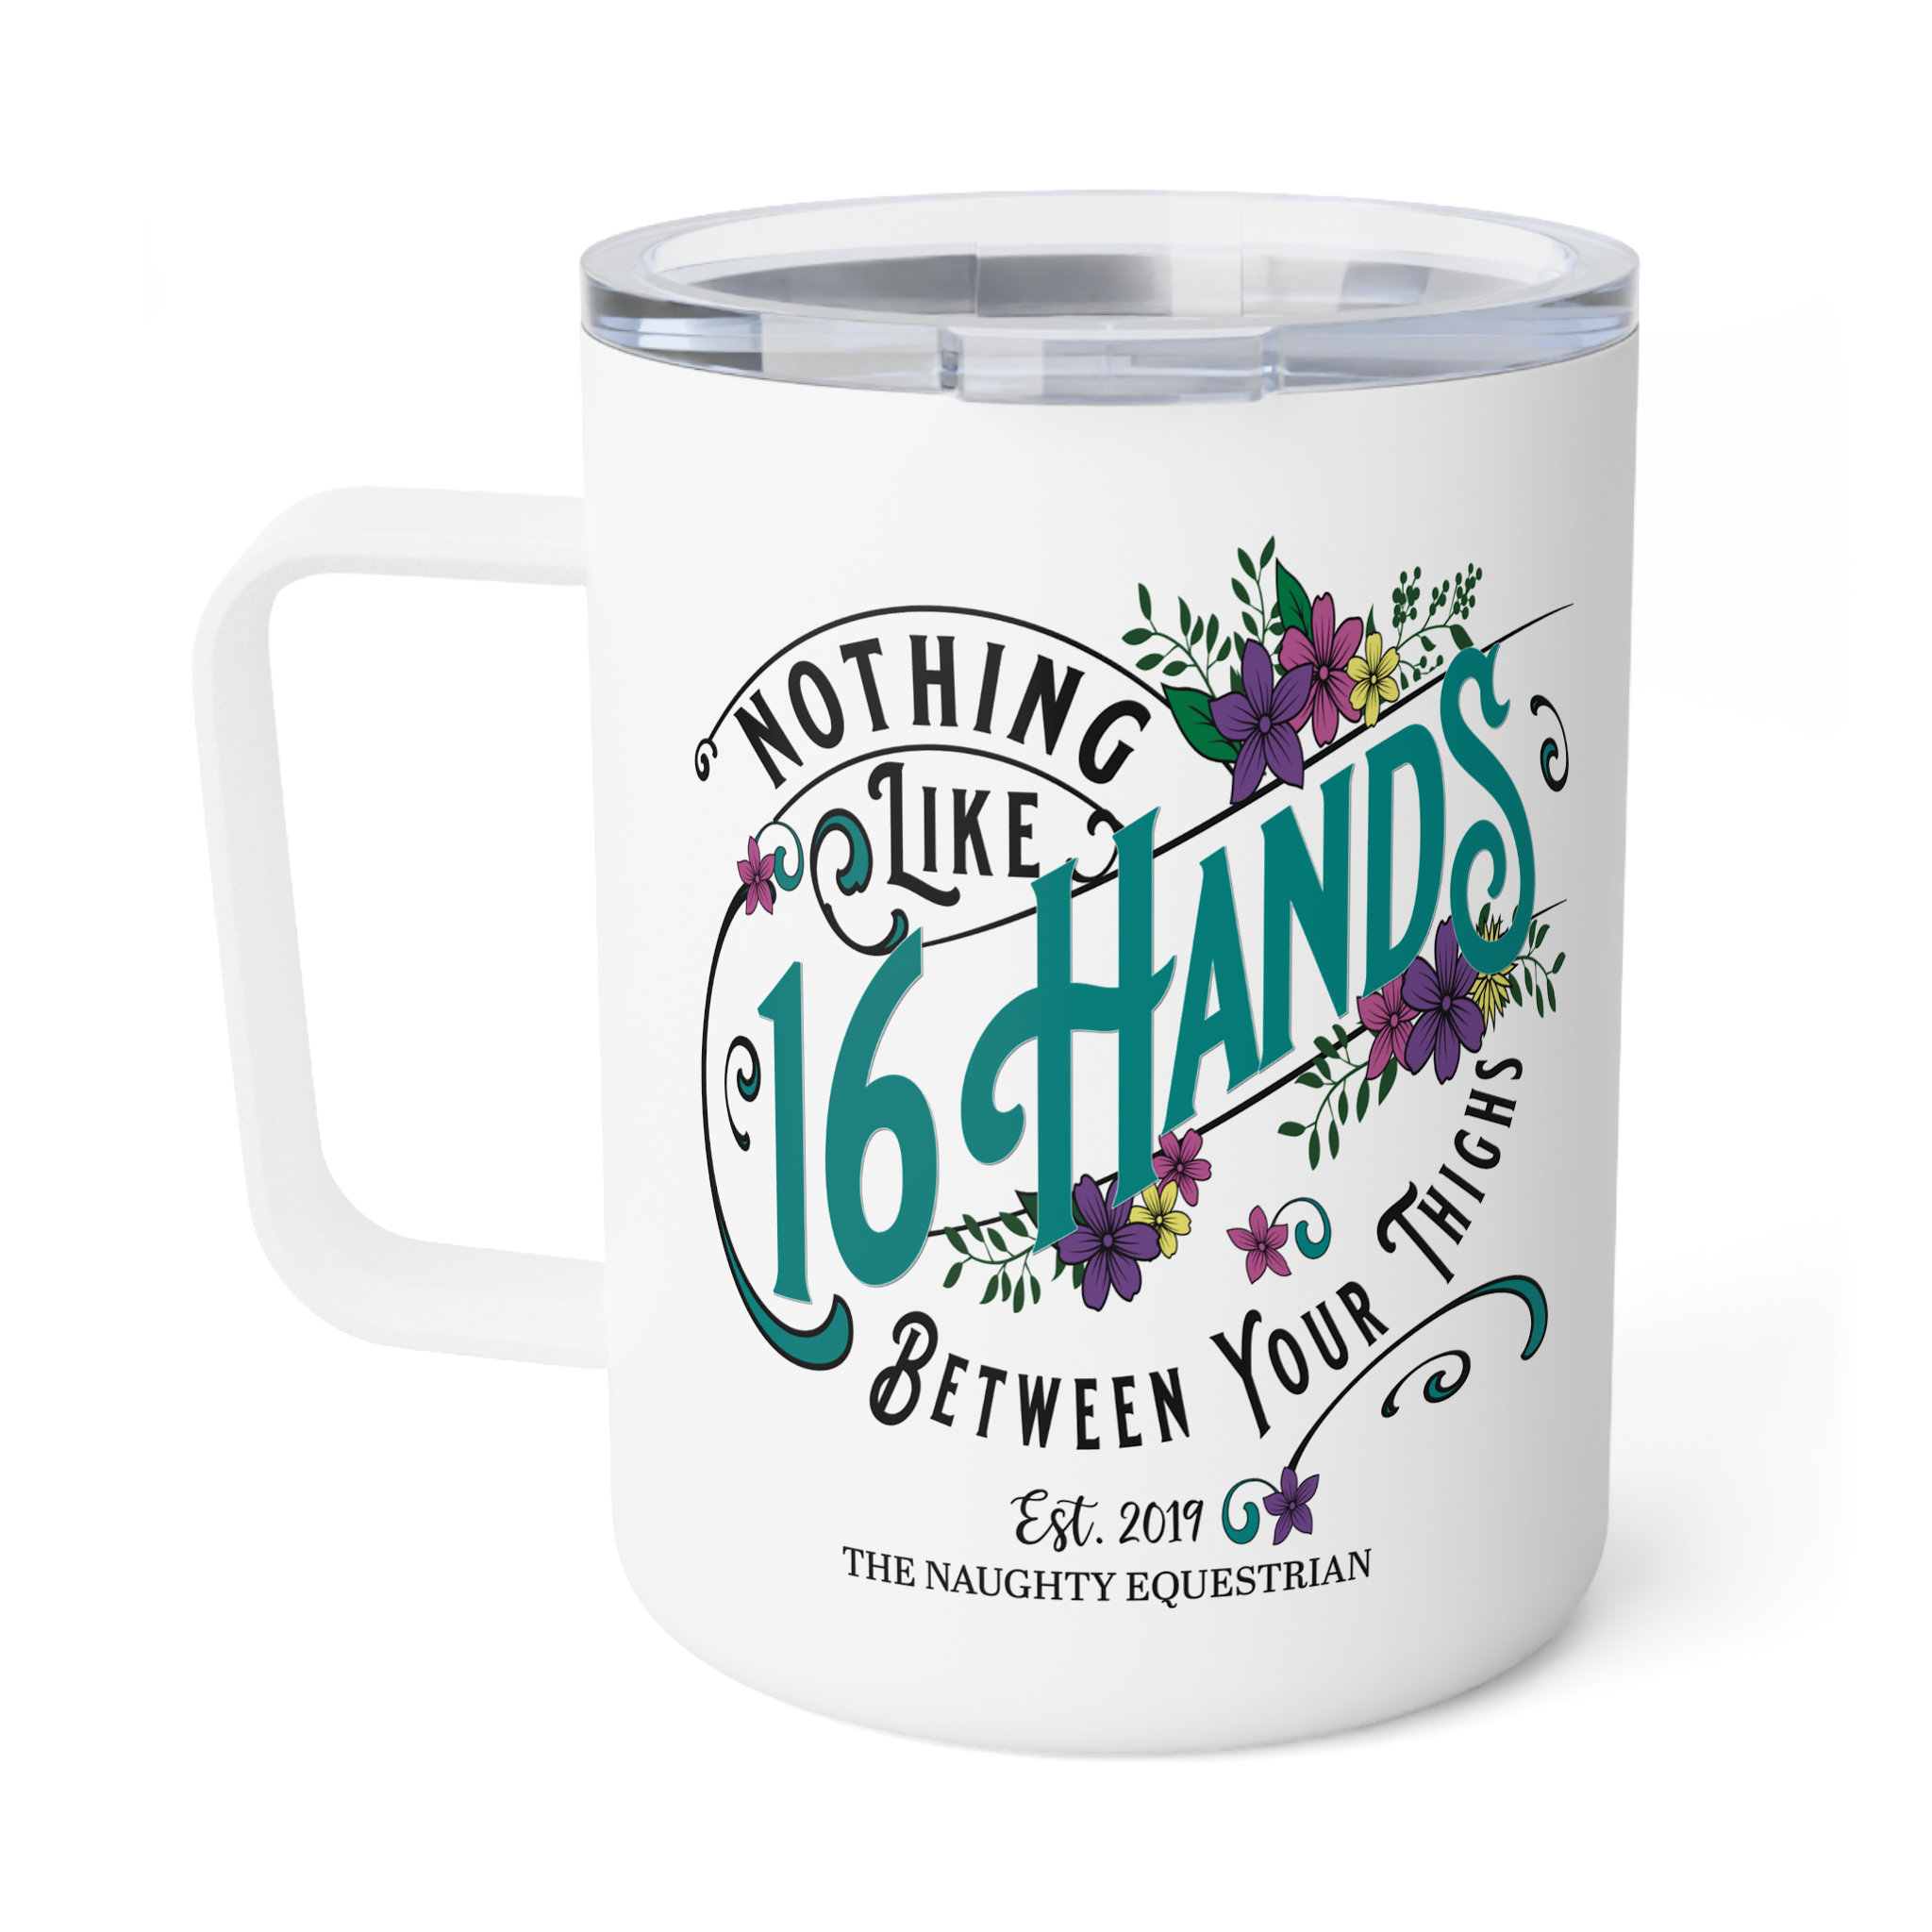 The Naughty Equestrian Wholesale Supplier 16 Hands Between Your Thighs Horse Mug, Camp Cup